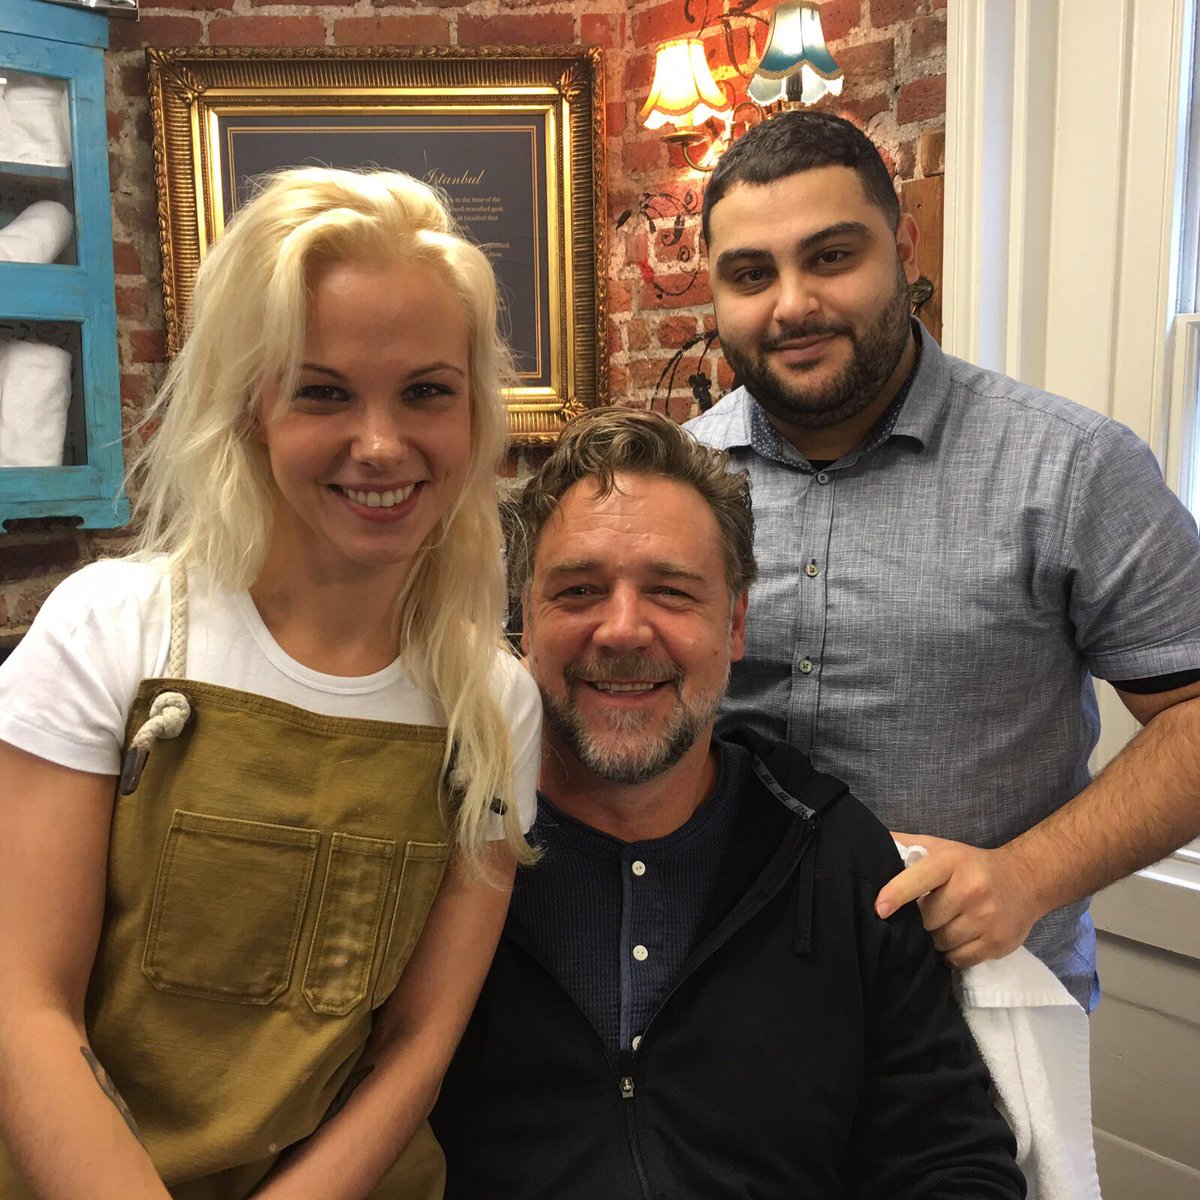 RT @Teds_Grooming: Look who's dropped by Ted's Mayfair Grooming Room! A pleasure to take care of @russellcrowe http://t.co/p3AIQrMzLy